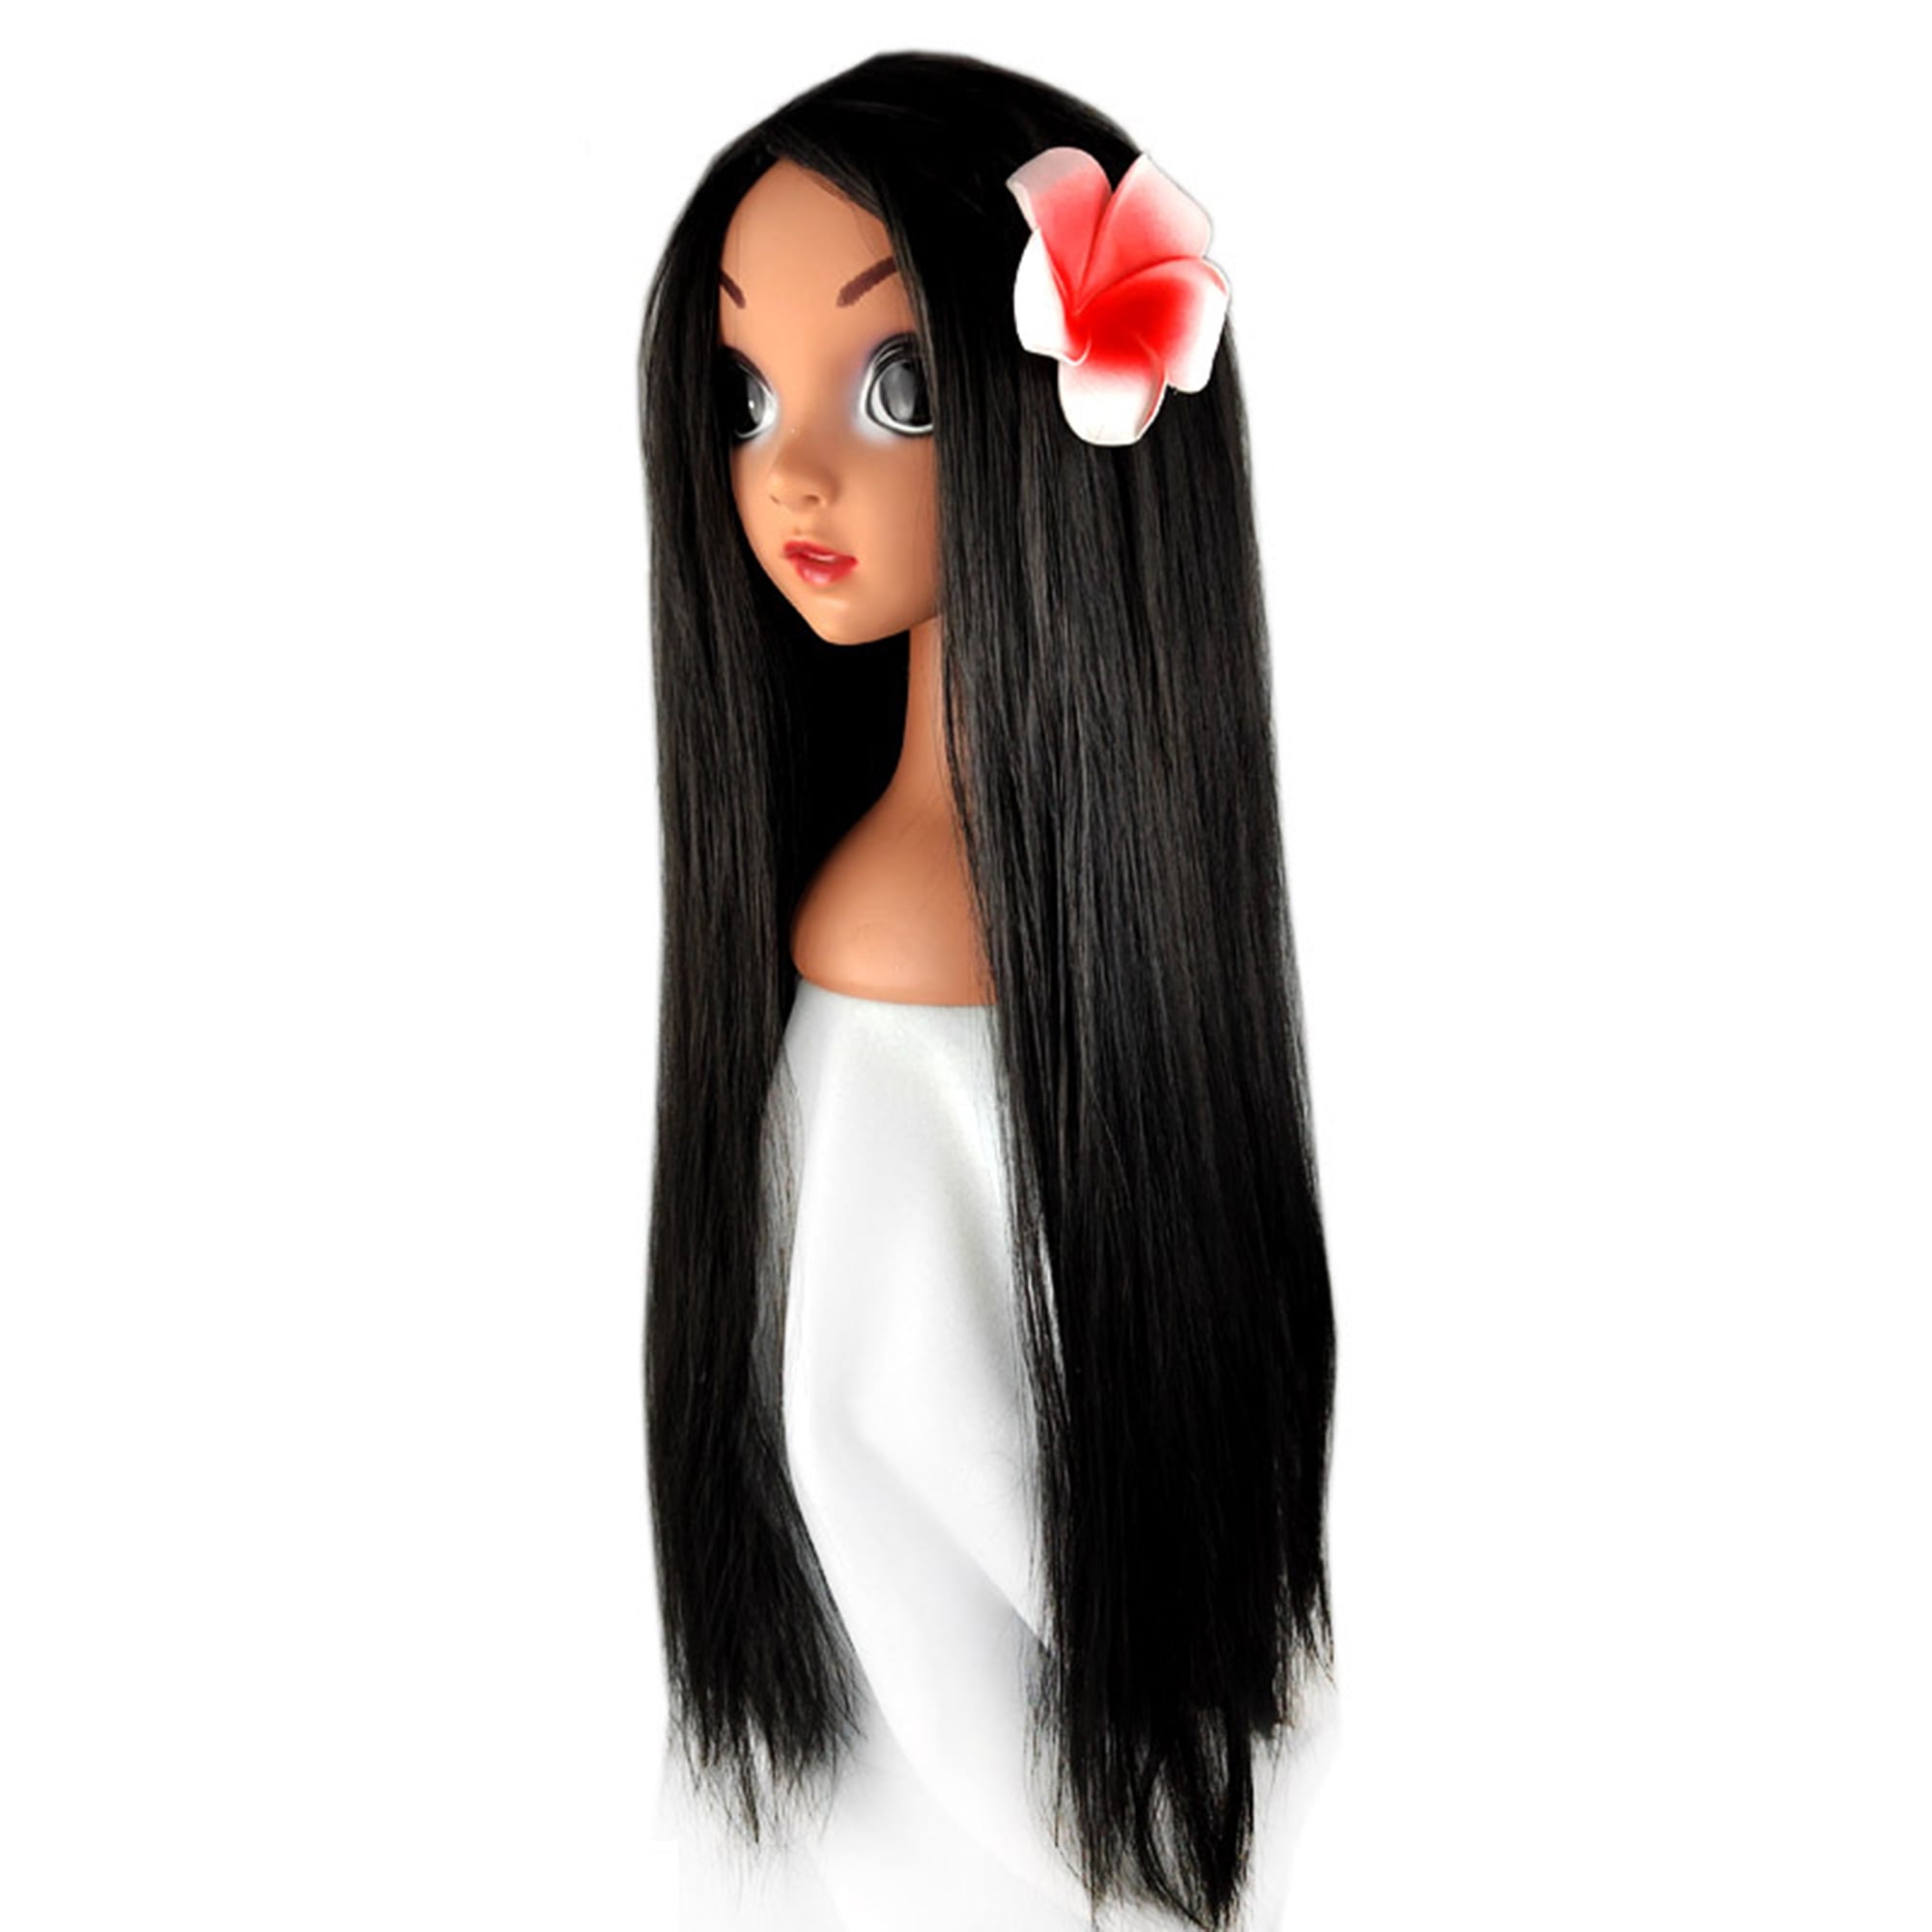 Girl Wigs Felt Non Paper Doll Outfit 20% OFF SALE